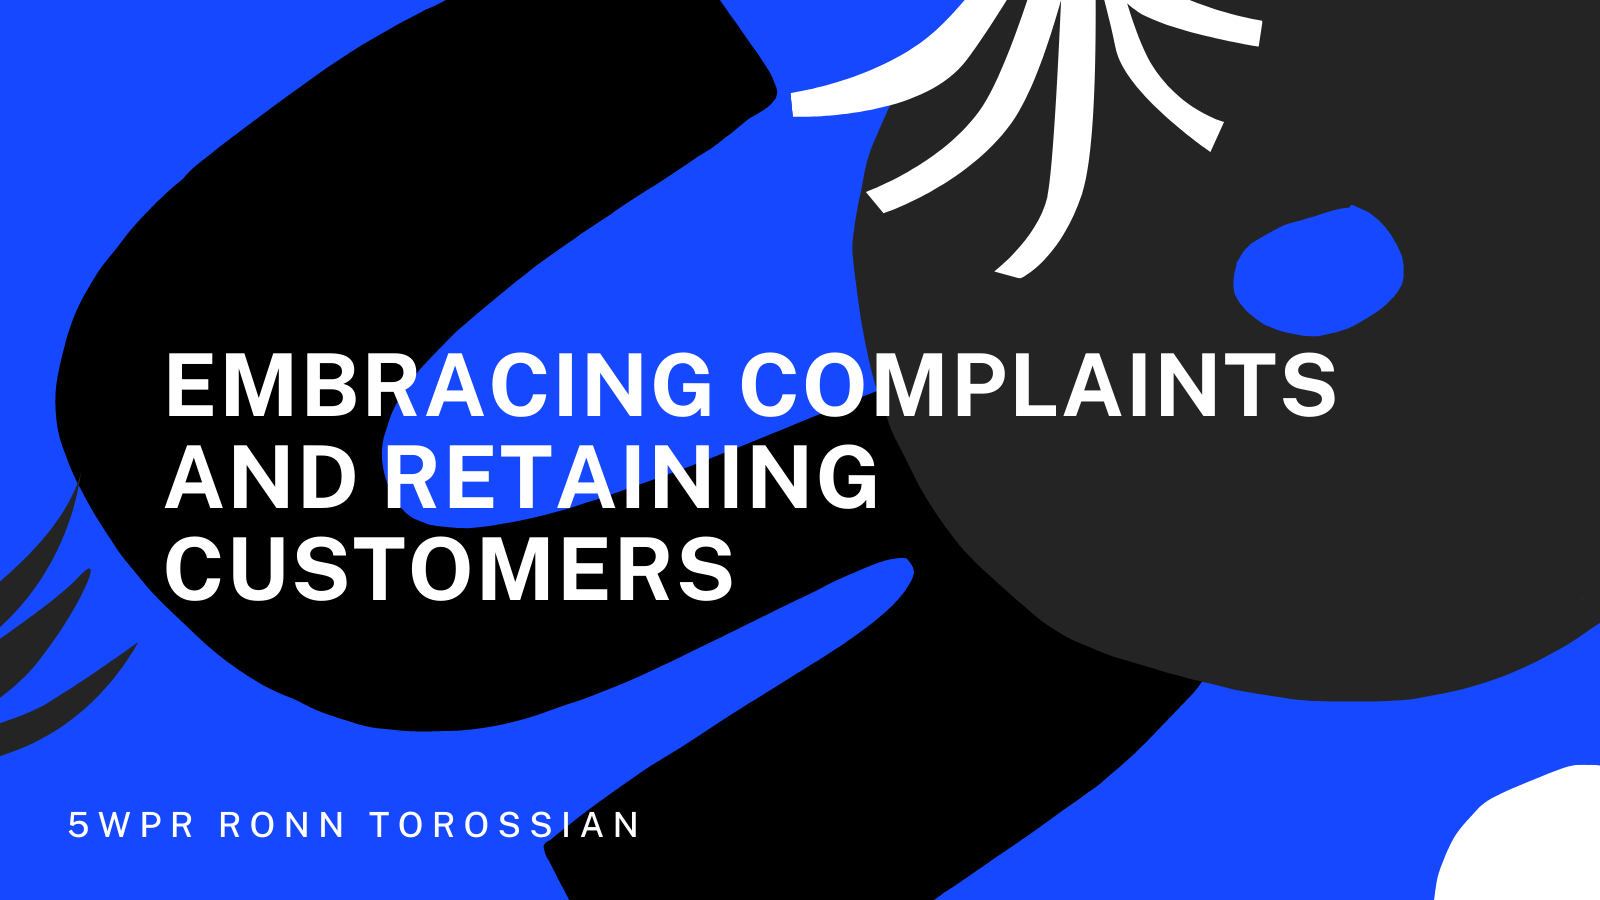 Embracing Complaints and Retaining Customers